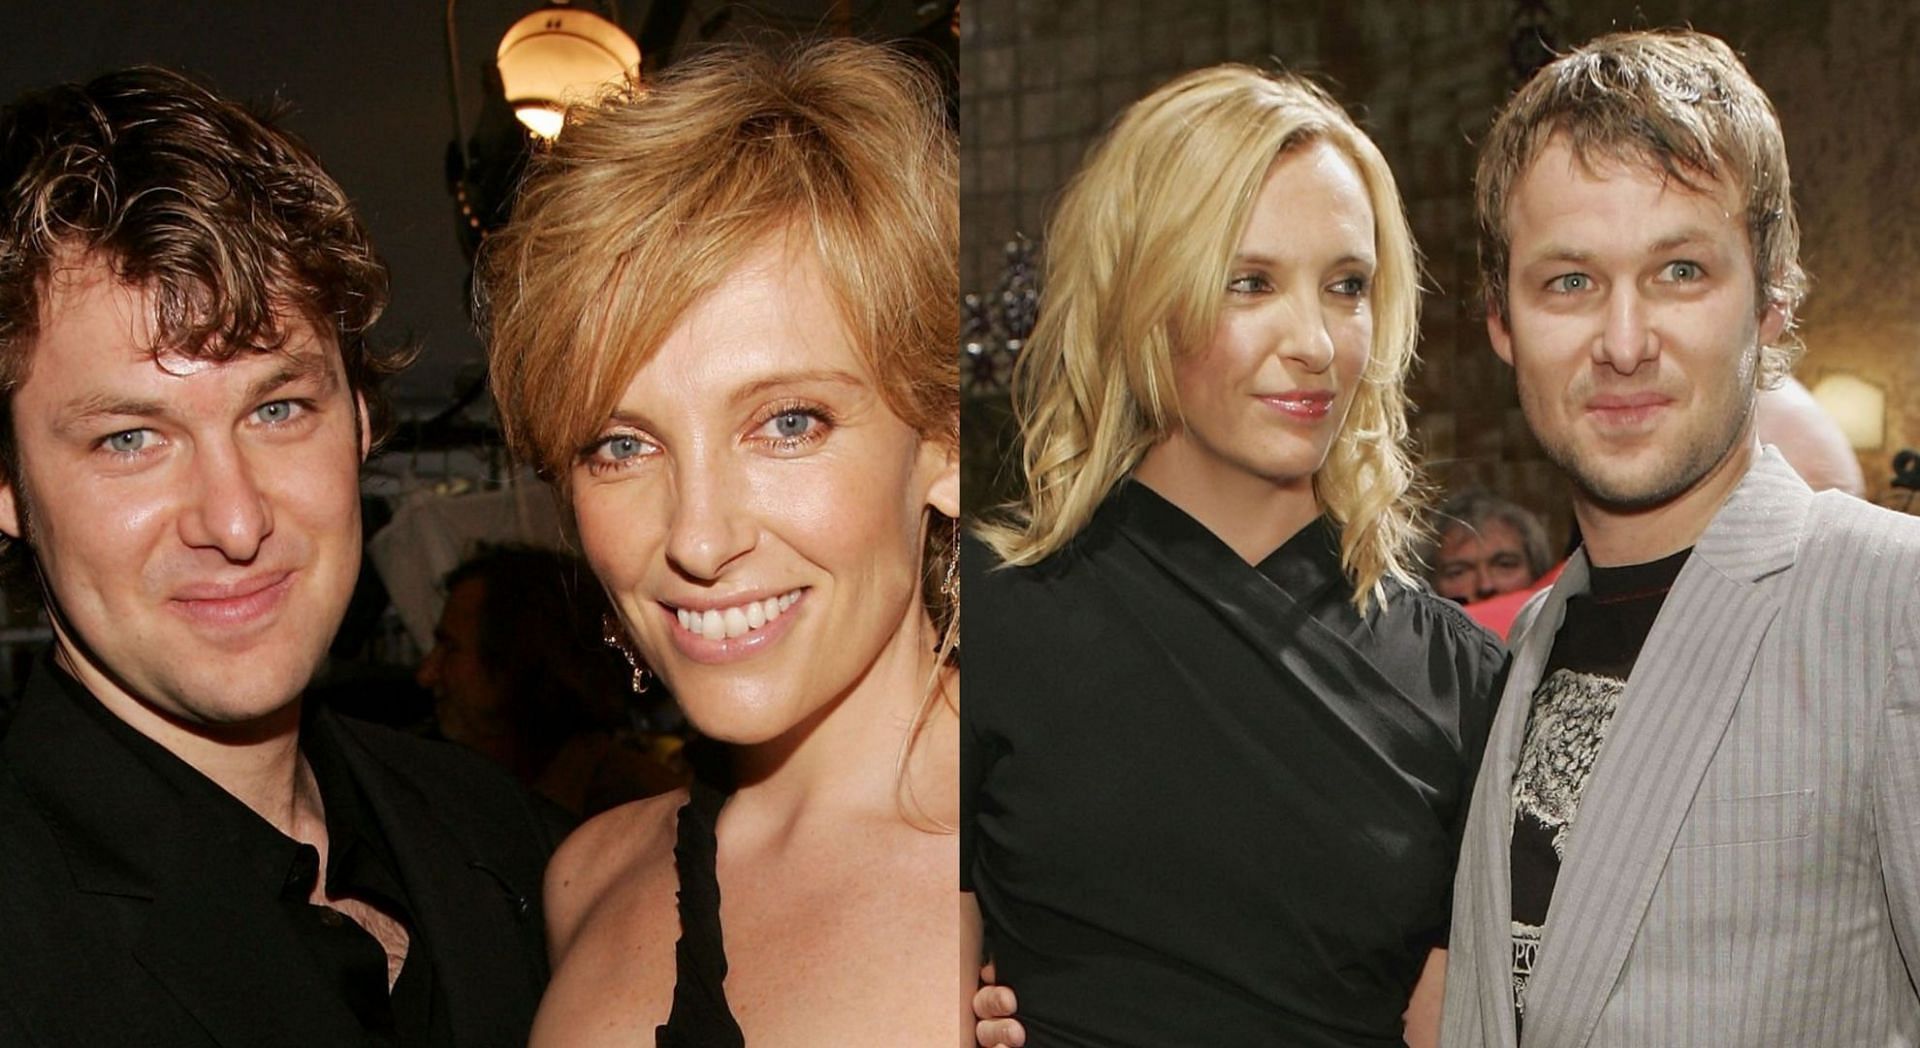 Toni Collette and Dave Galafassi have filed for divorce after 20 years of marriage (Image via Getty Images)